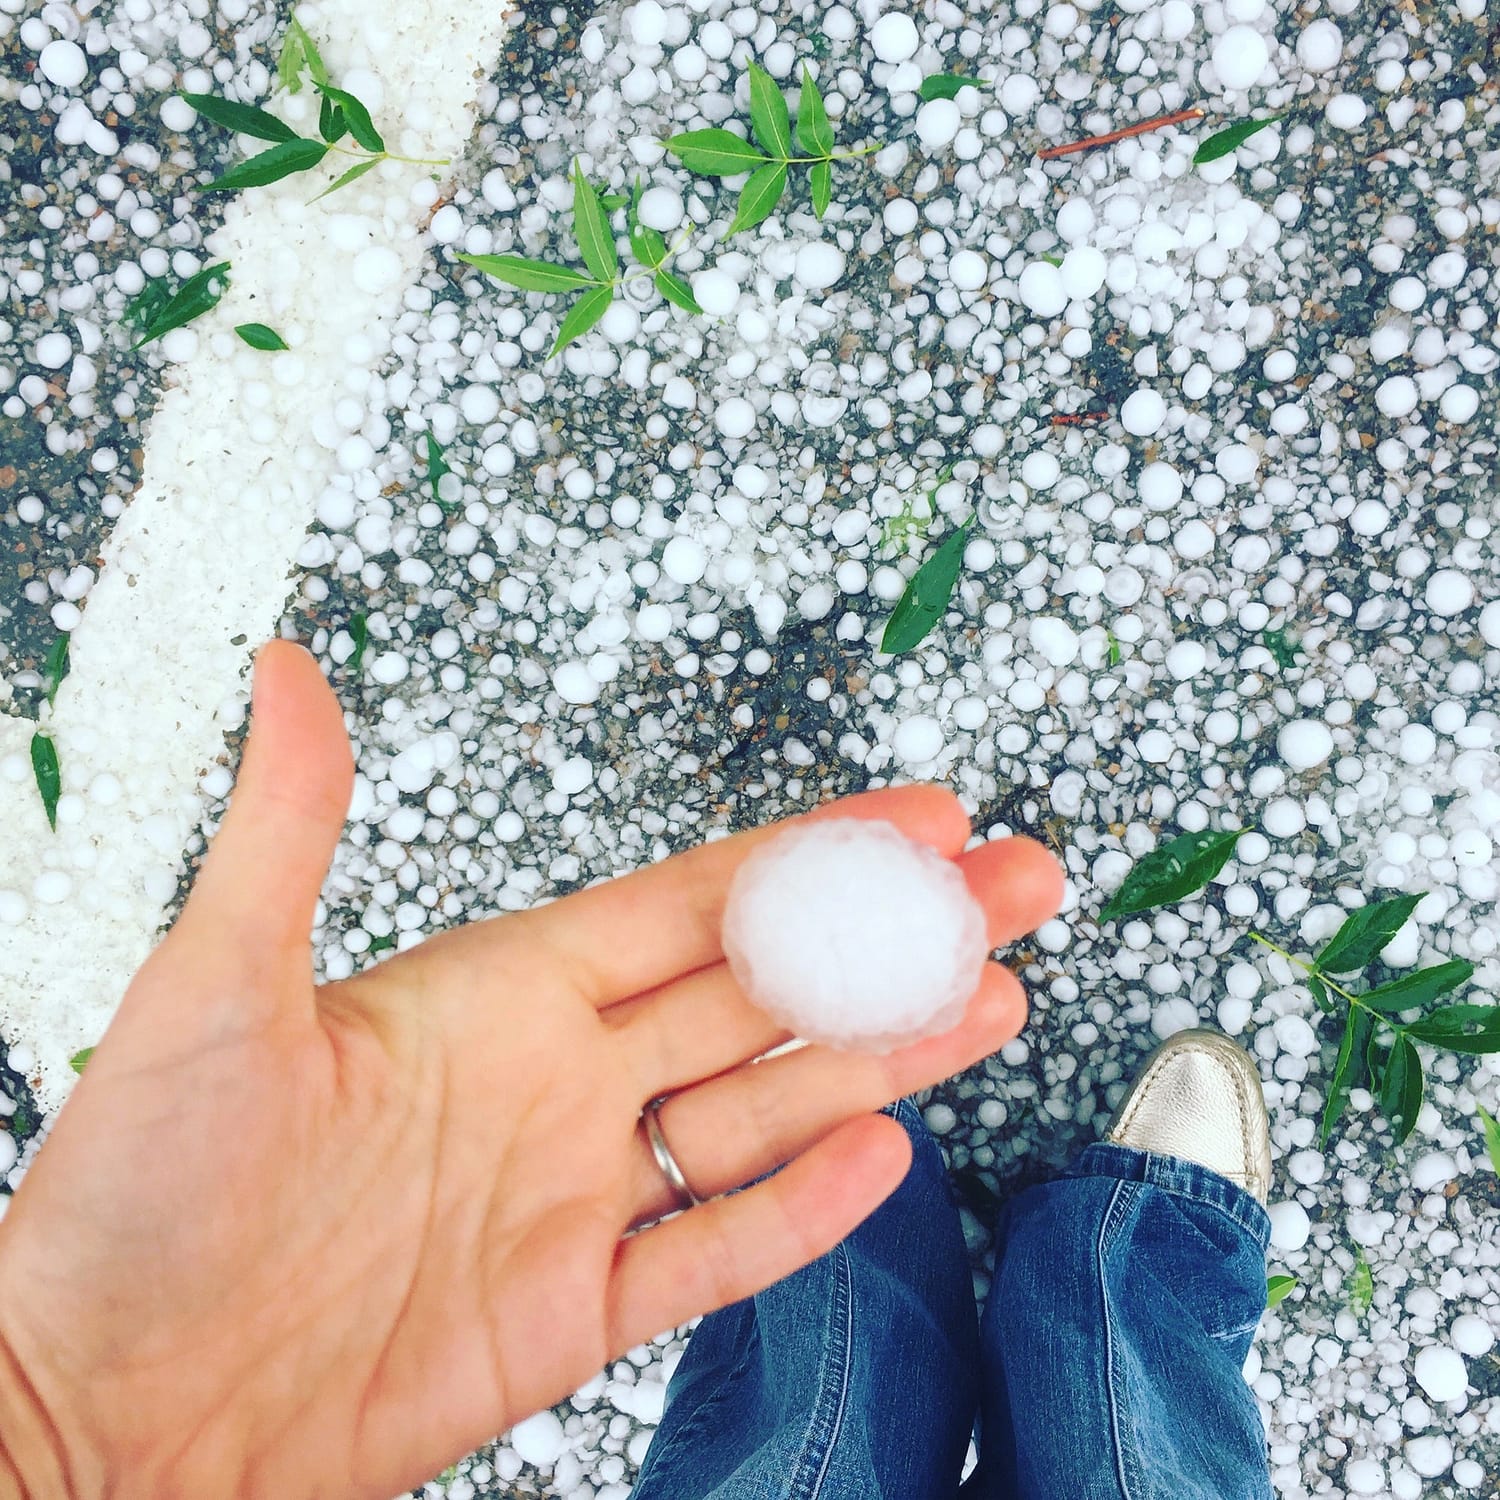 Hail. women’s hand to compare the size of hail pic in white green and blue colors